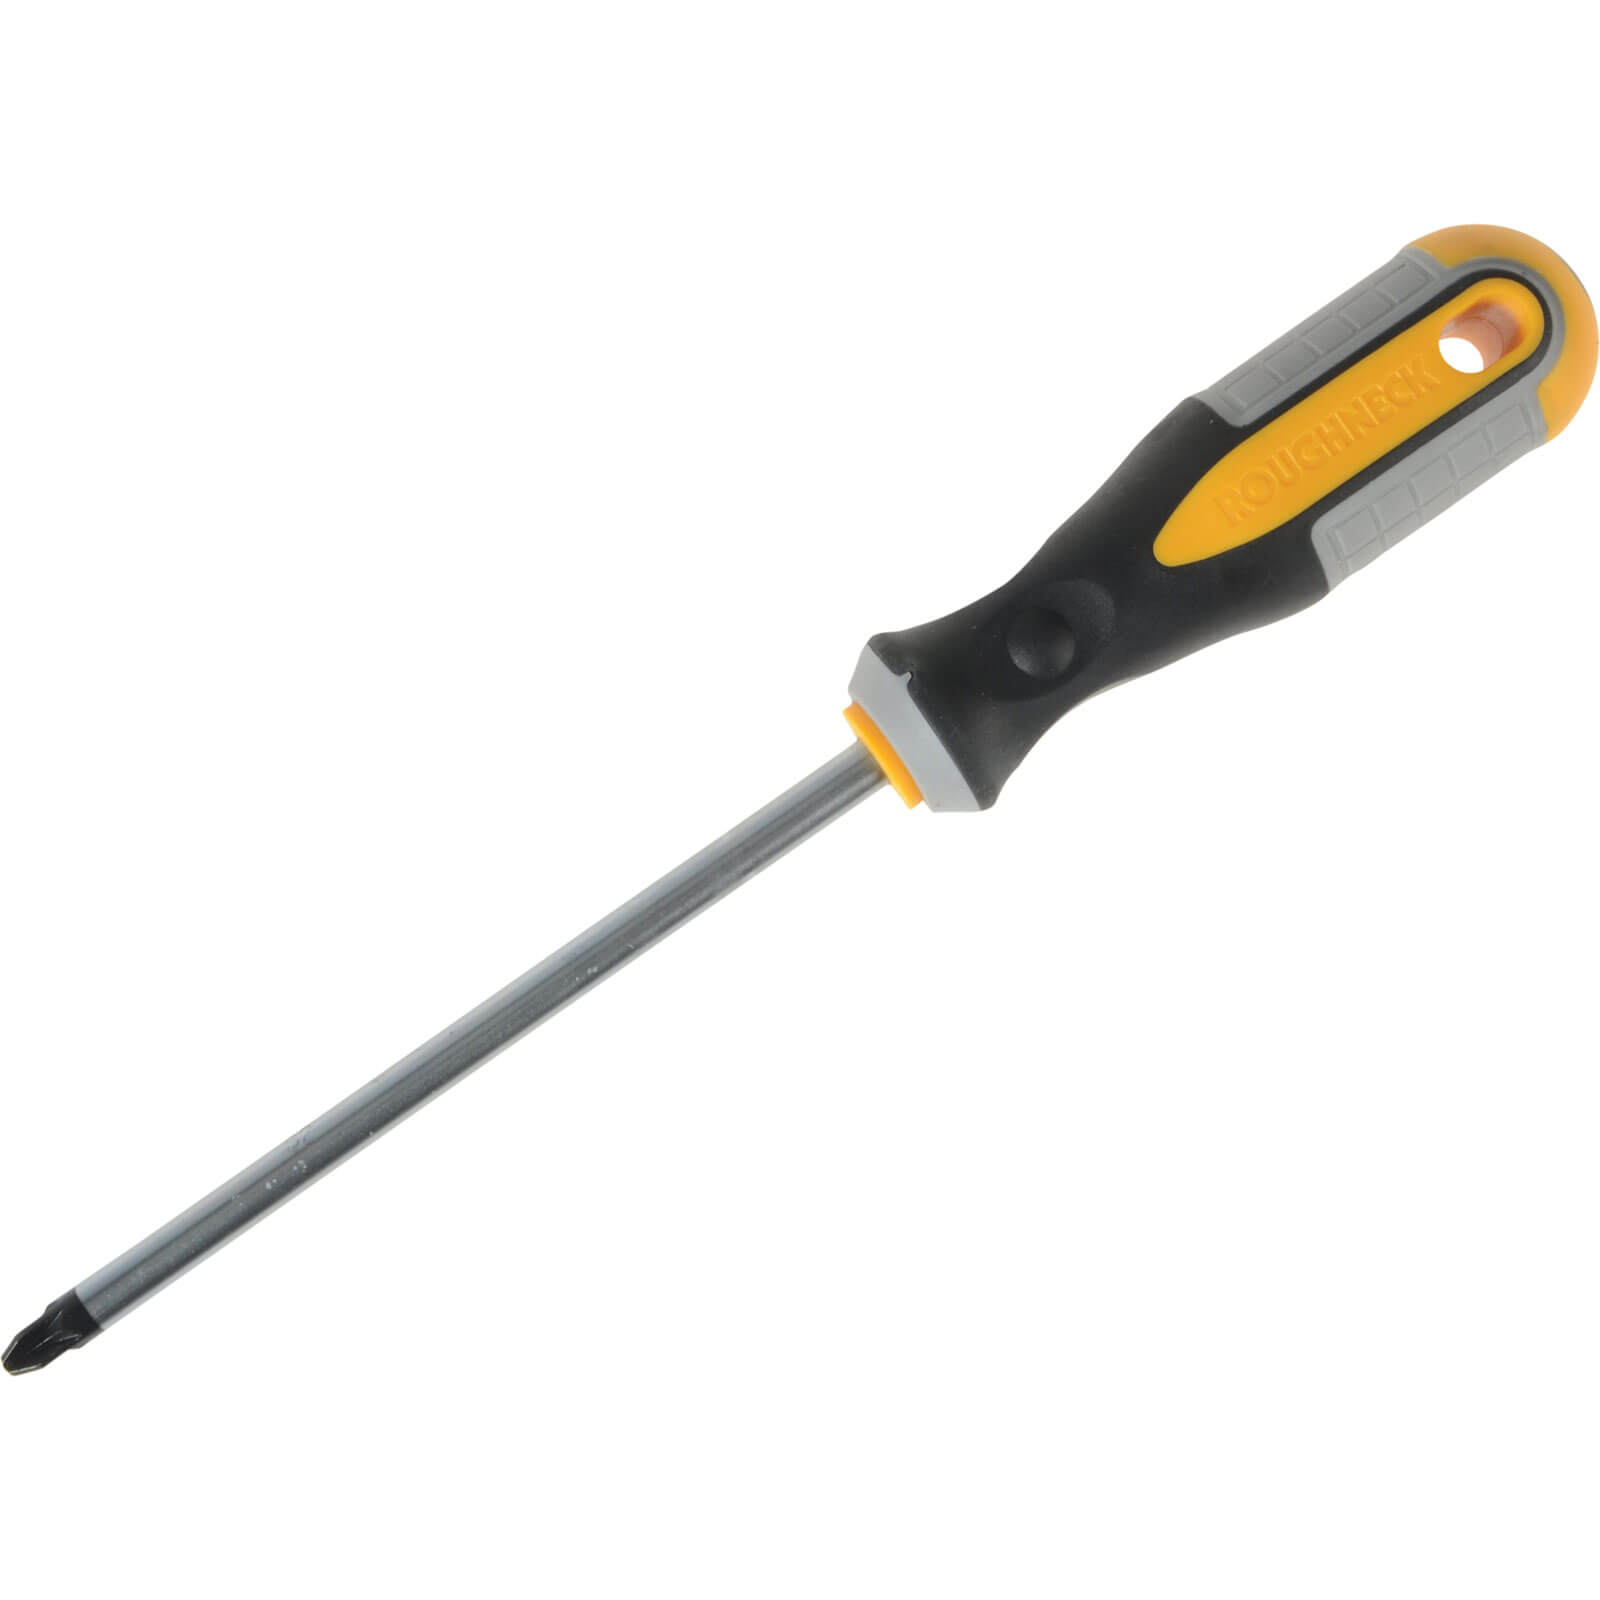 Photo of Roughneck Magnetic Pozi Screwdriver Pz3 150mm